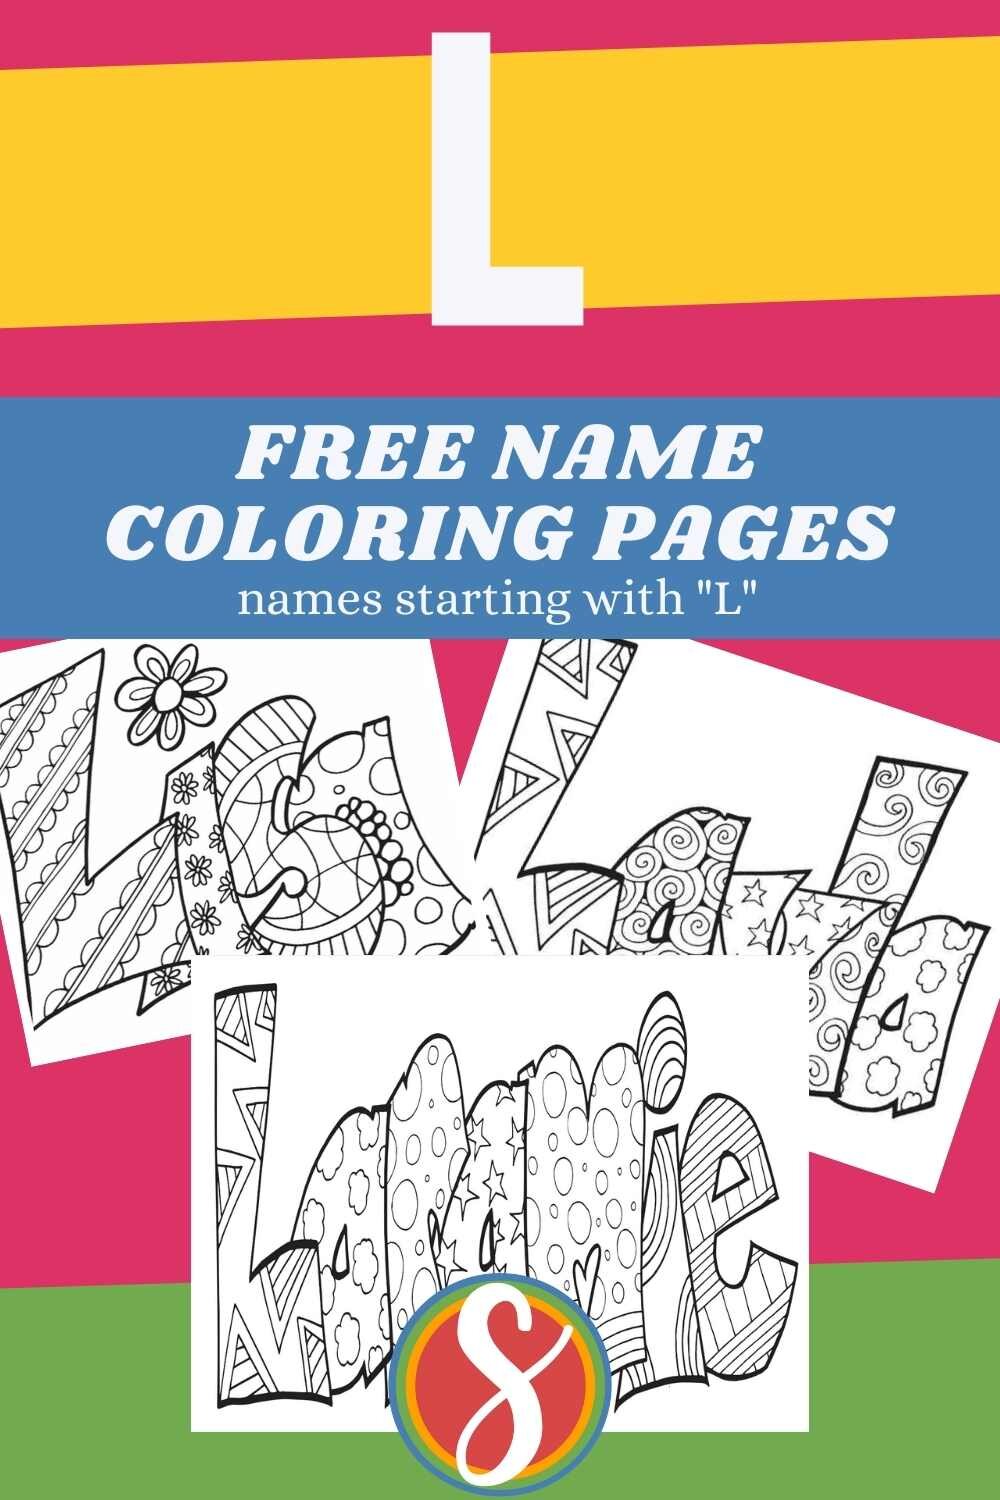 free name coloring pages starts with l.jpg